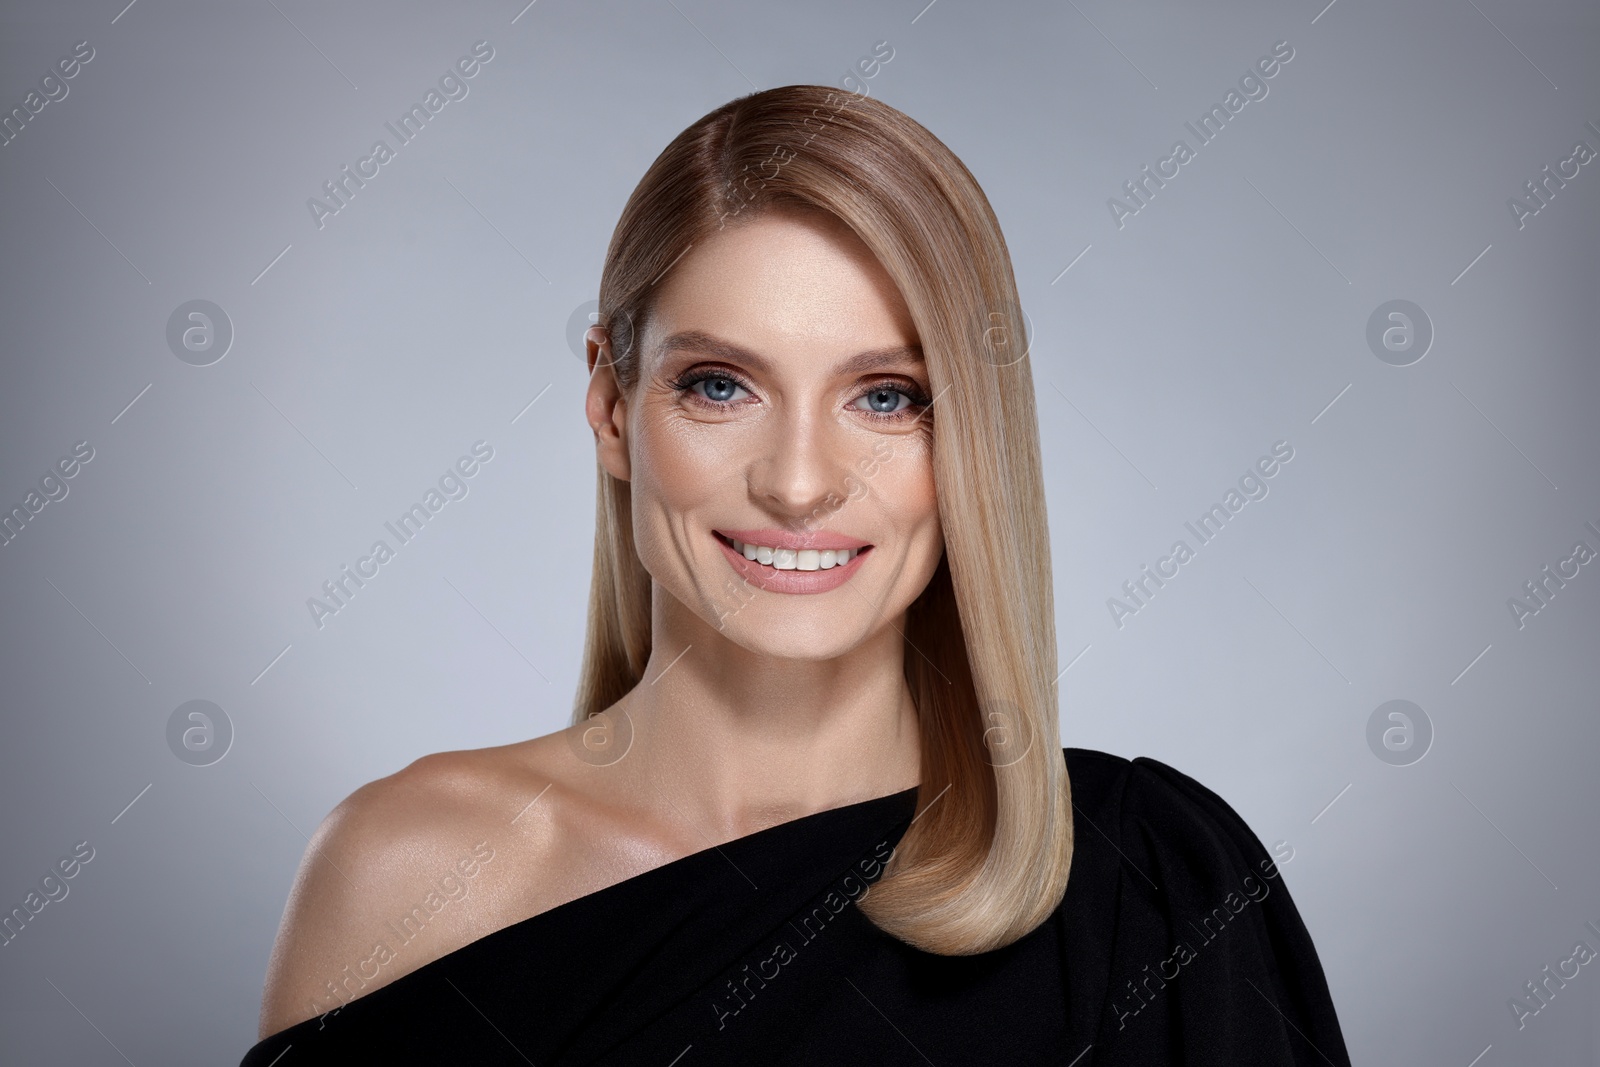 Image of Portrait of stylish attractive woman with blonde hair smiling on grey background